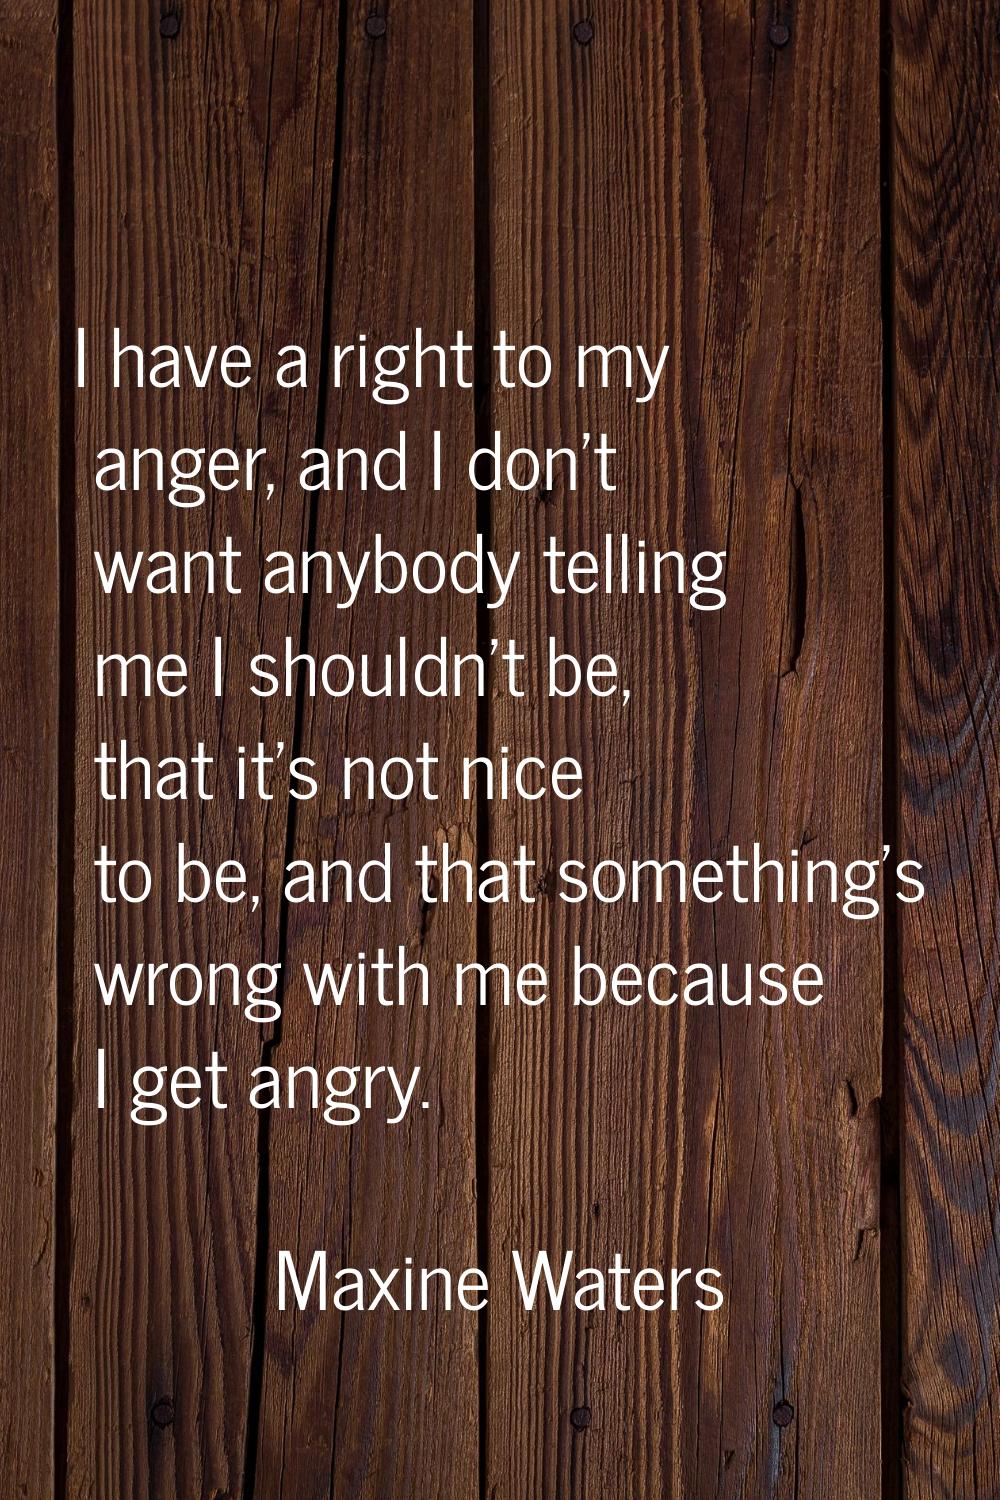 I have a right to my anger, and I don't want anybody telling me I shouldn't be, that it's not nice 